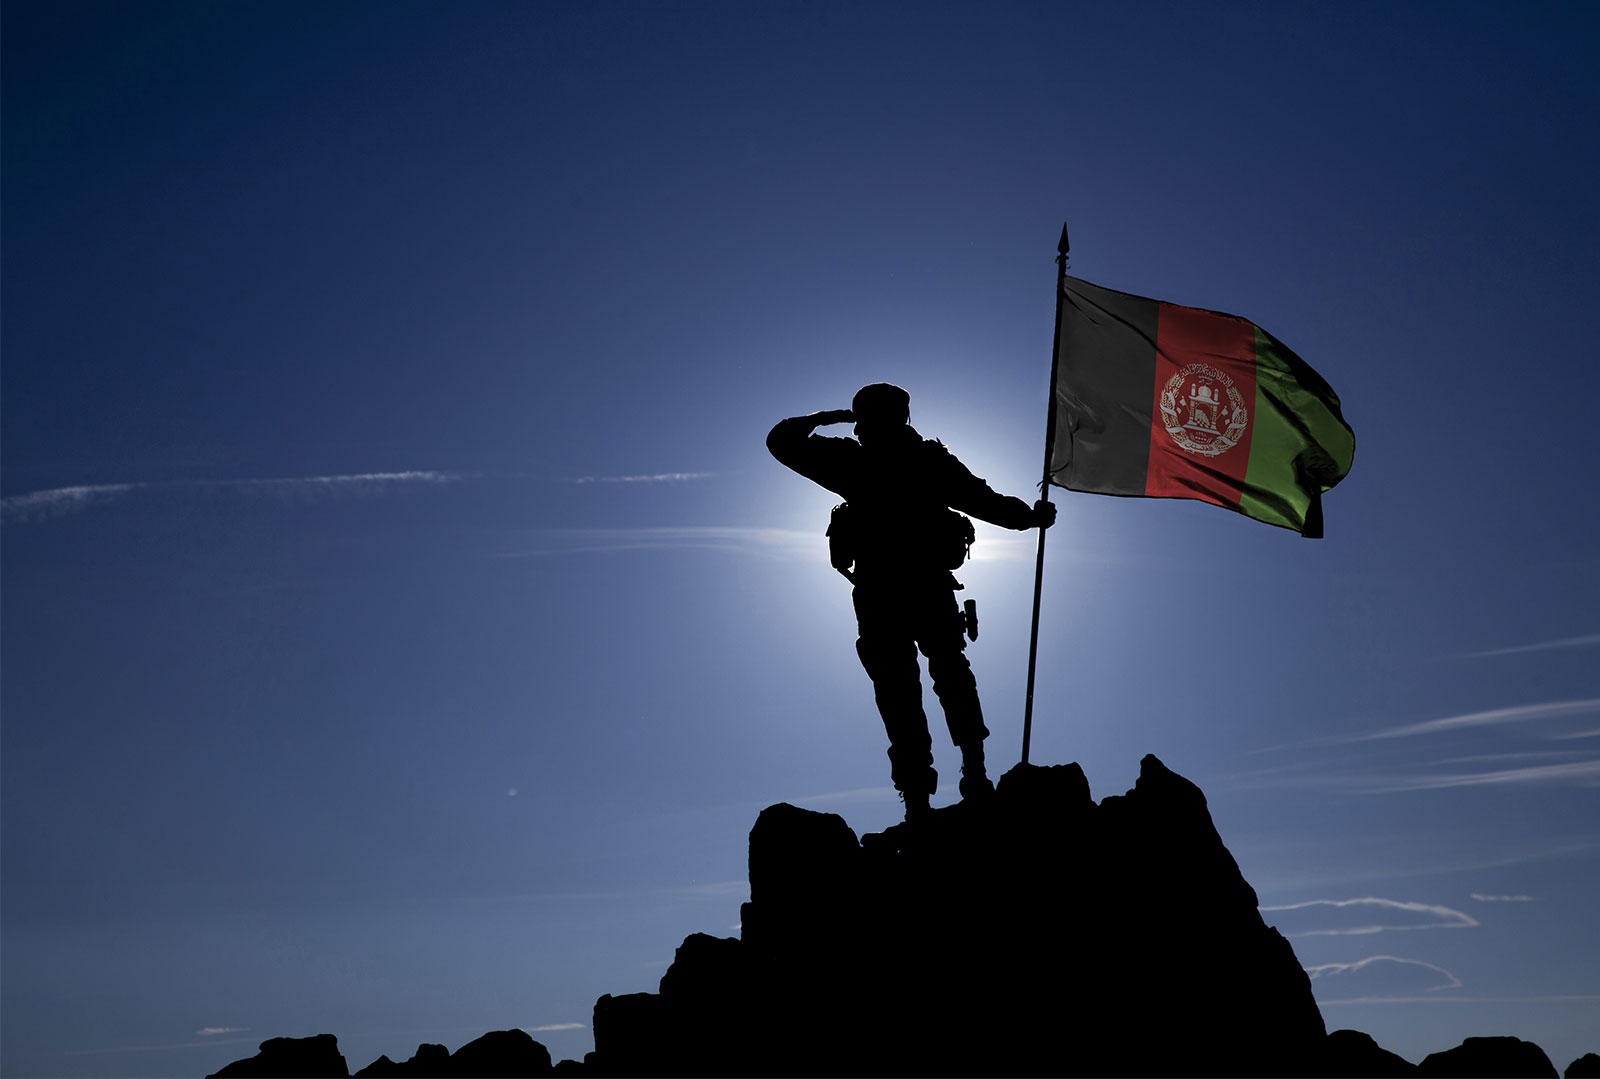 New Statement of Changes to the Immigration Rules: Afghan Relocations and Assistance Policy